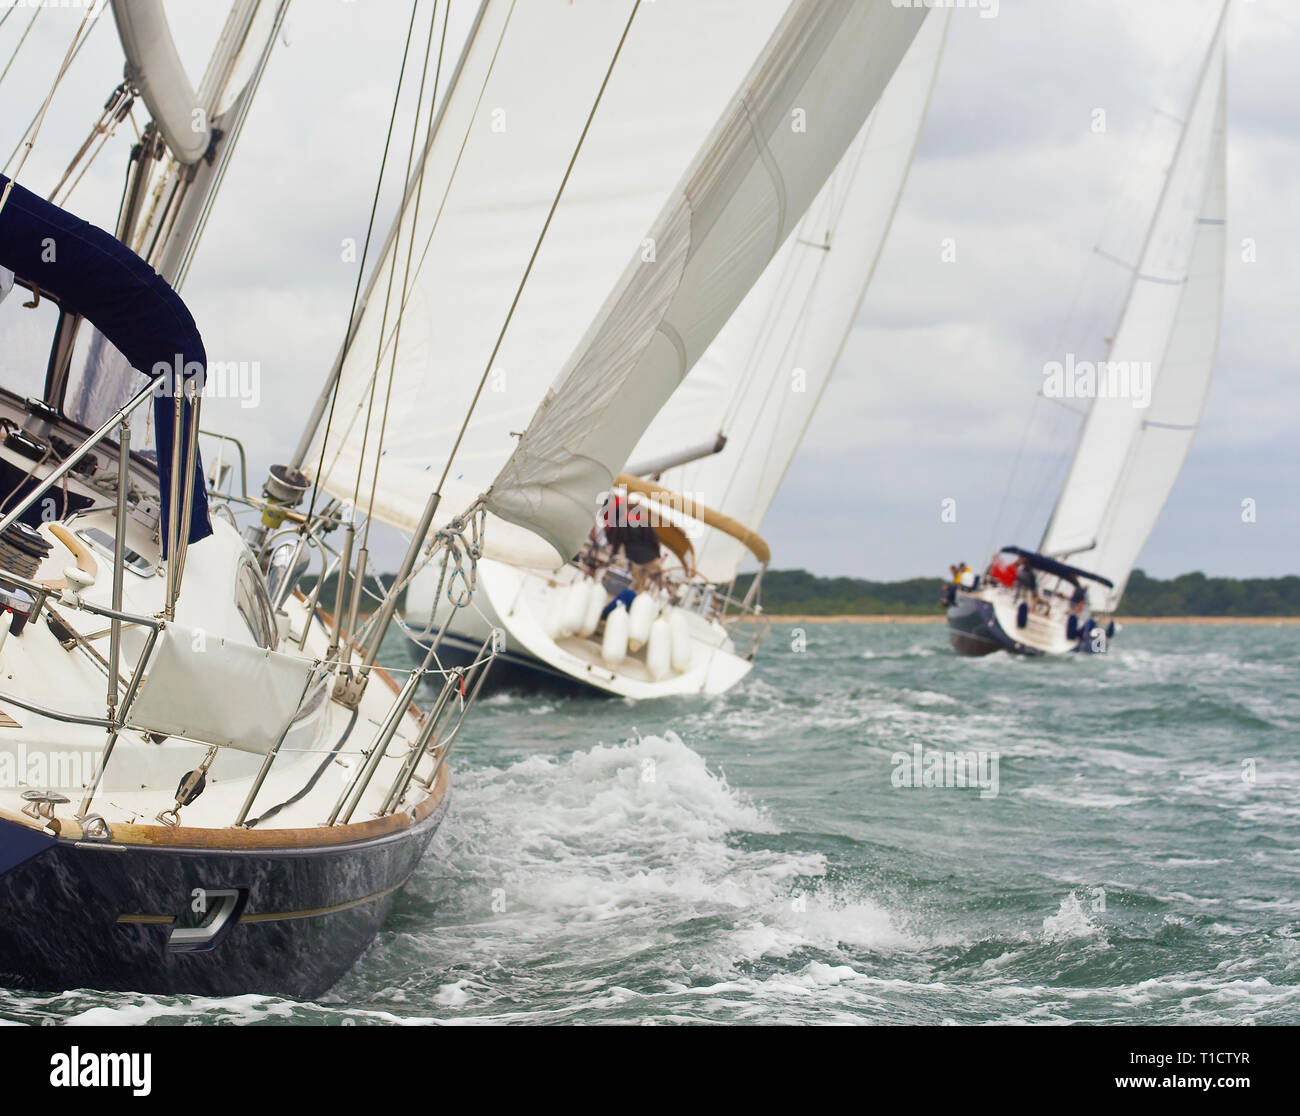 Three beautiful yachts sailboats with white sails racing close to each other on a bright sunny day Stock Photo